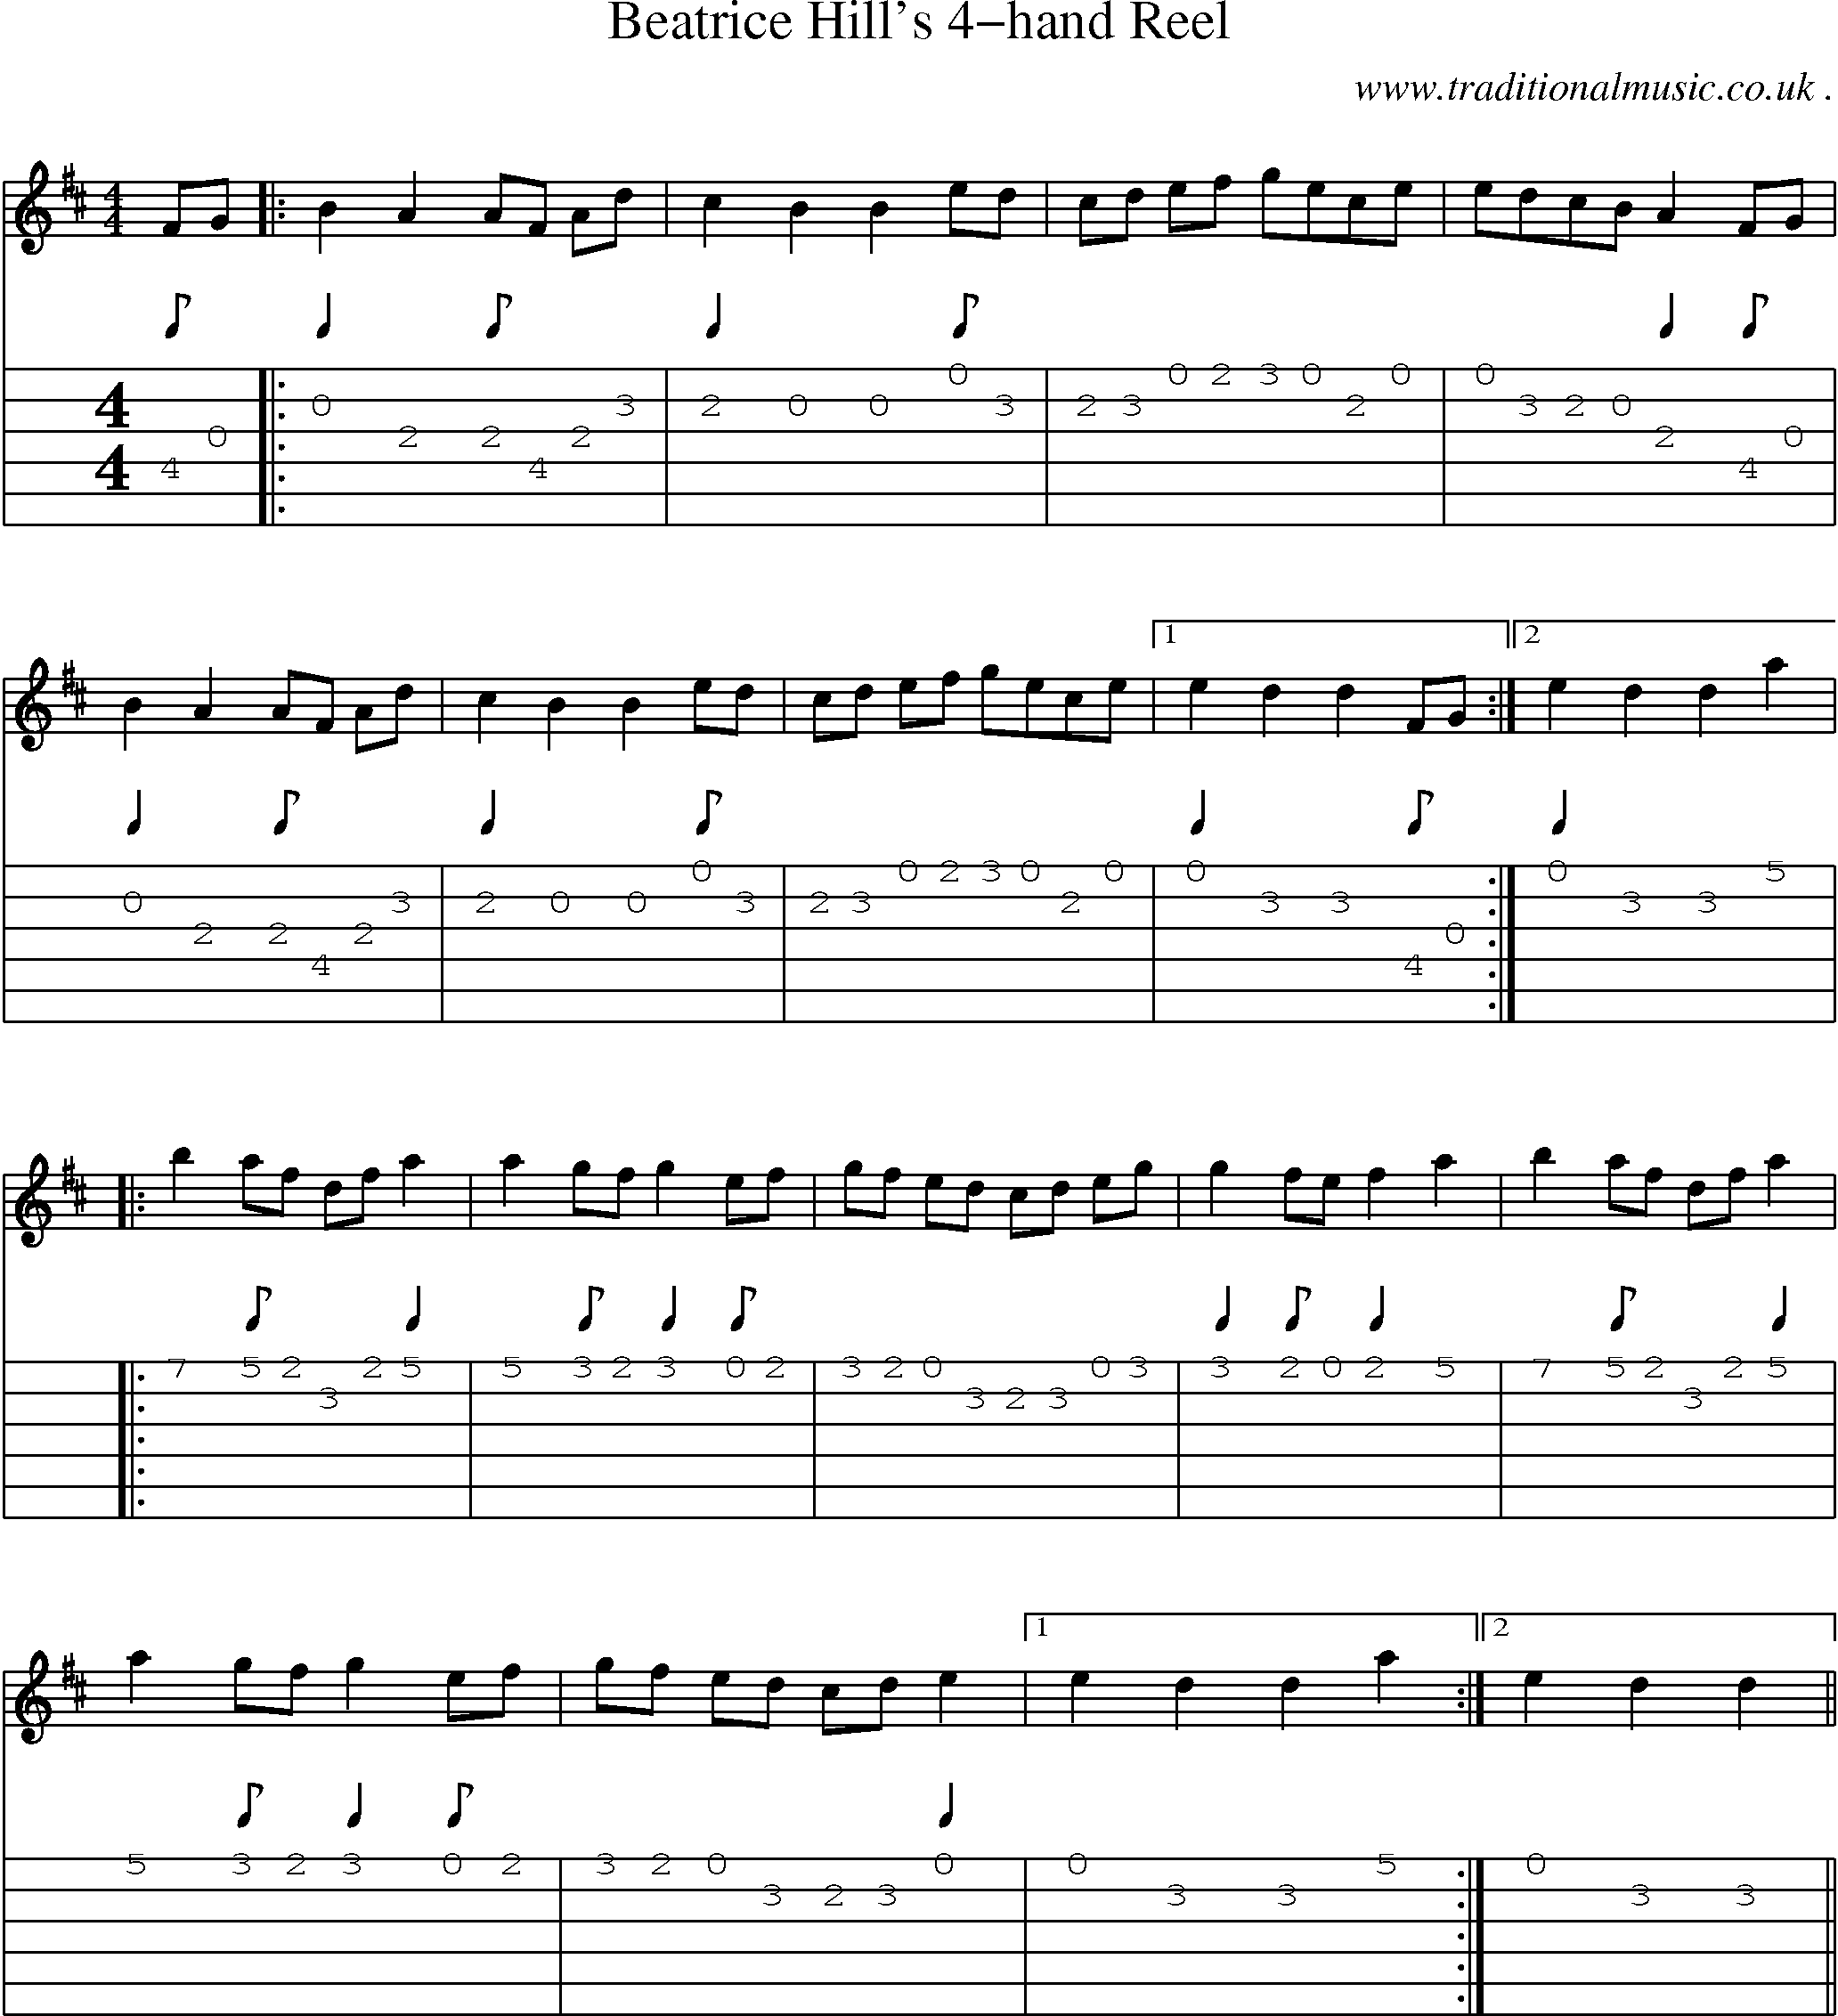 Sheet-Music and Guitar Tabs for Beatrice Hills 4-hand Reel